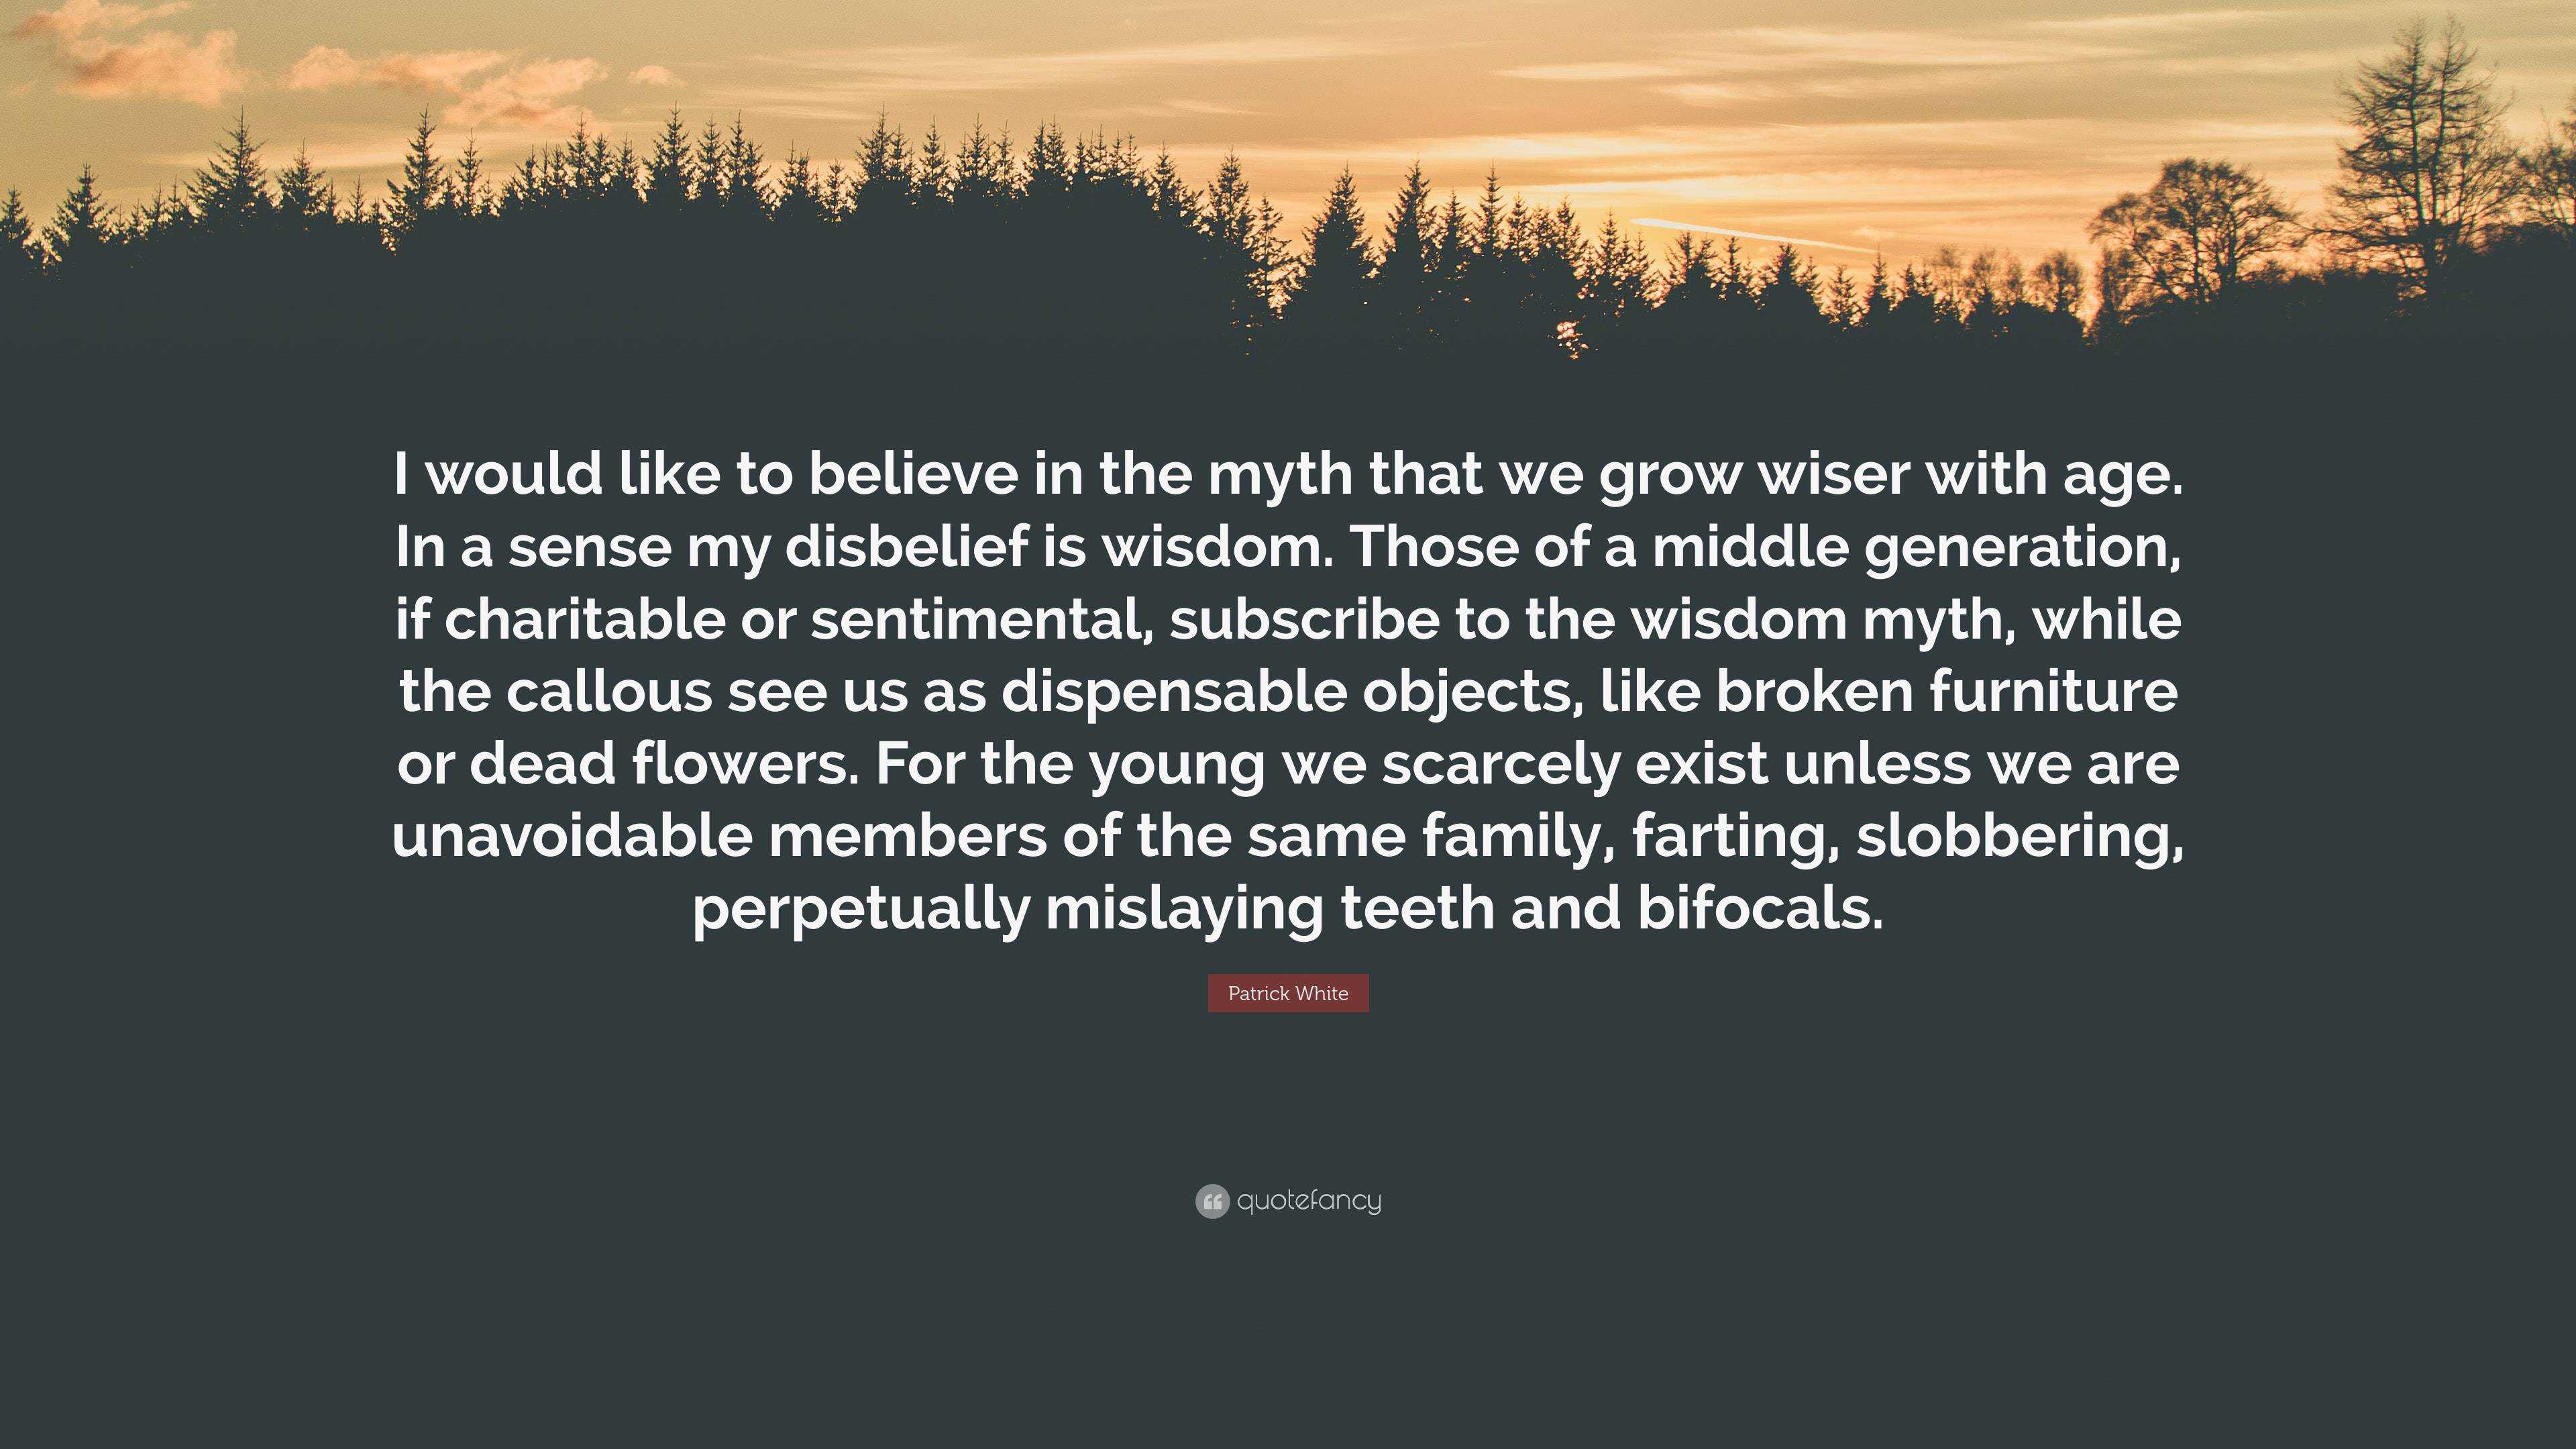 Patrick White Quote: “I would like to believe in the myth that we